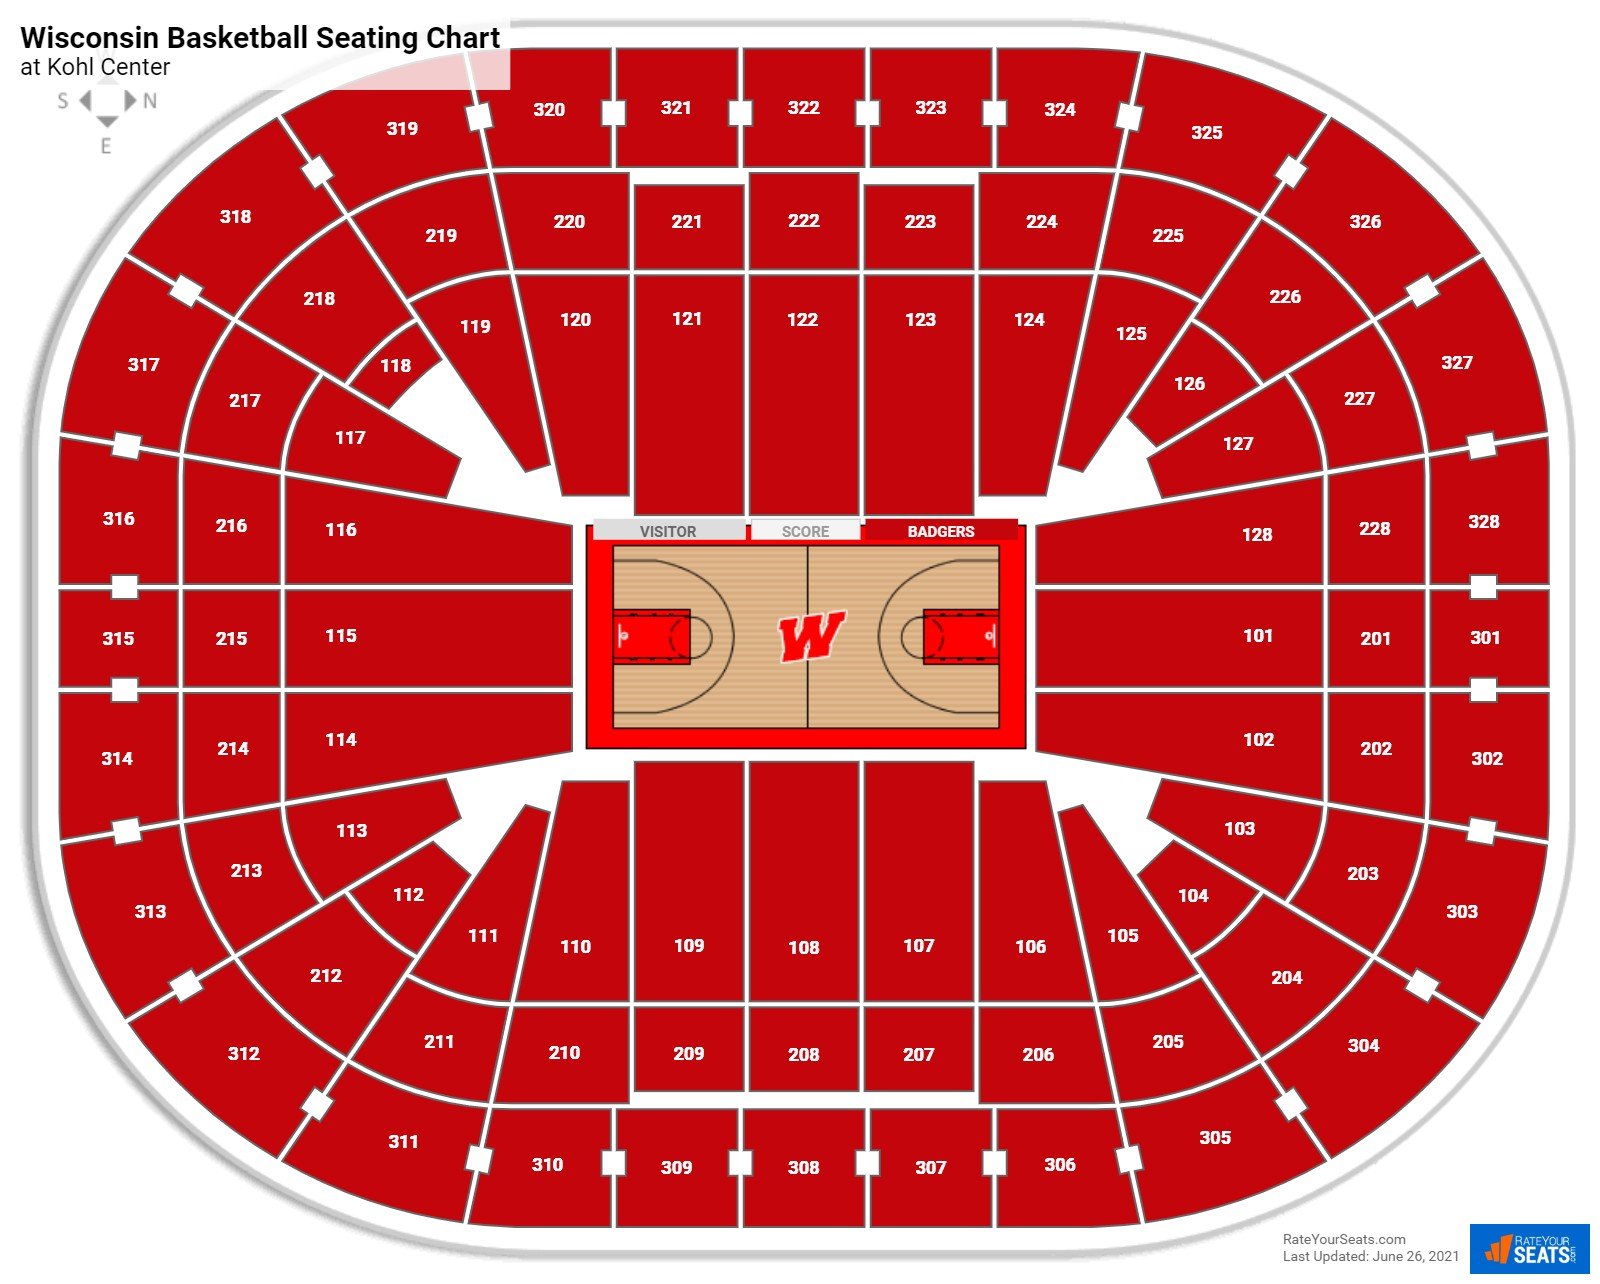 Wisconsin Badgers Seating Chart at Kohl Center